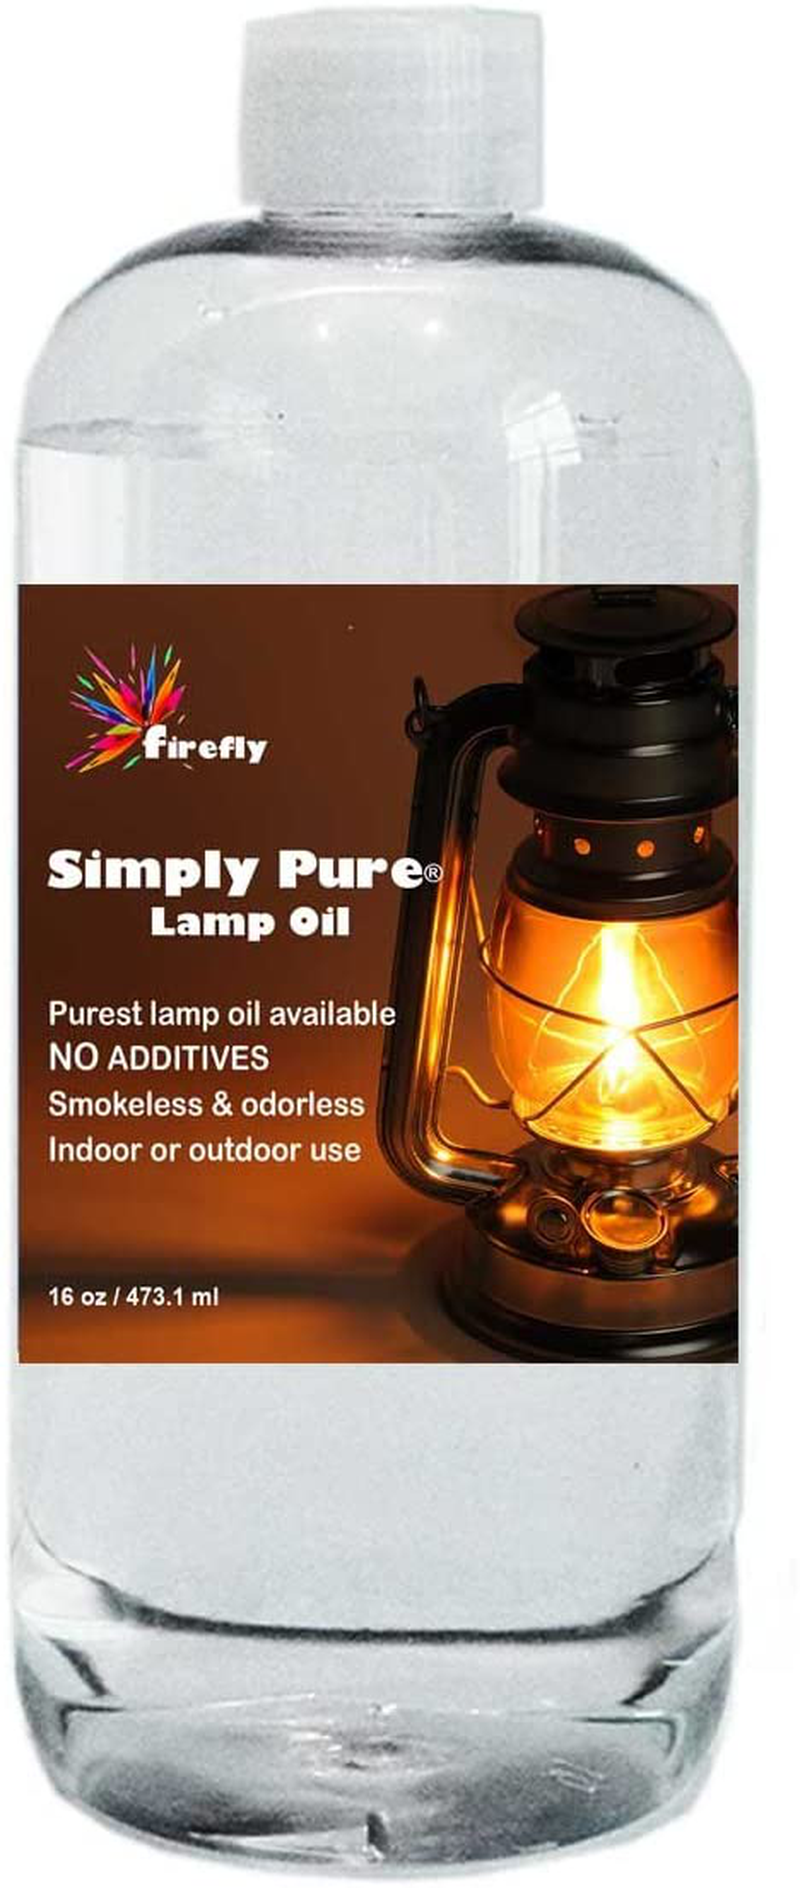 Firefly Modern Transcend Clear Glass Oil Lamp | 2-Piece Borosilicate Glass Includes Bliss Oil Candle Suspended in The Hurricane Candle Holder Sleeve - Includes 16 oz. Smokeless, Paraffin Lamp Oil Home & Garden > Lighting Accessories > Oil Lamp Fuel Firefly   